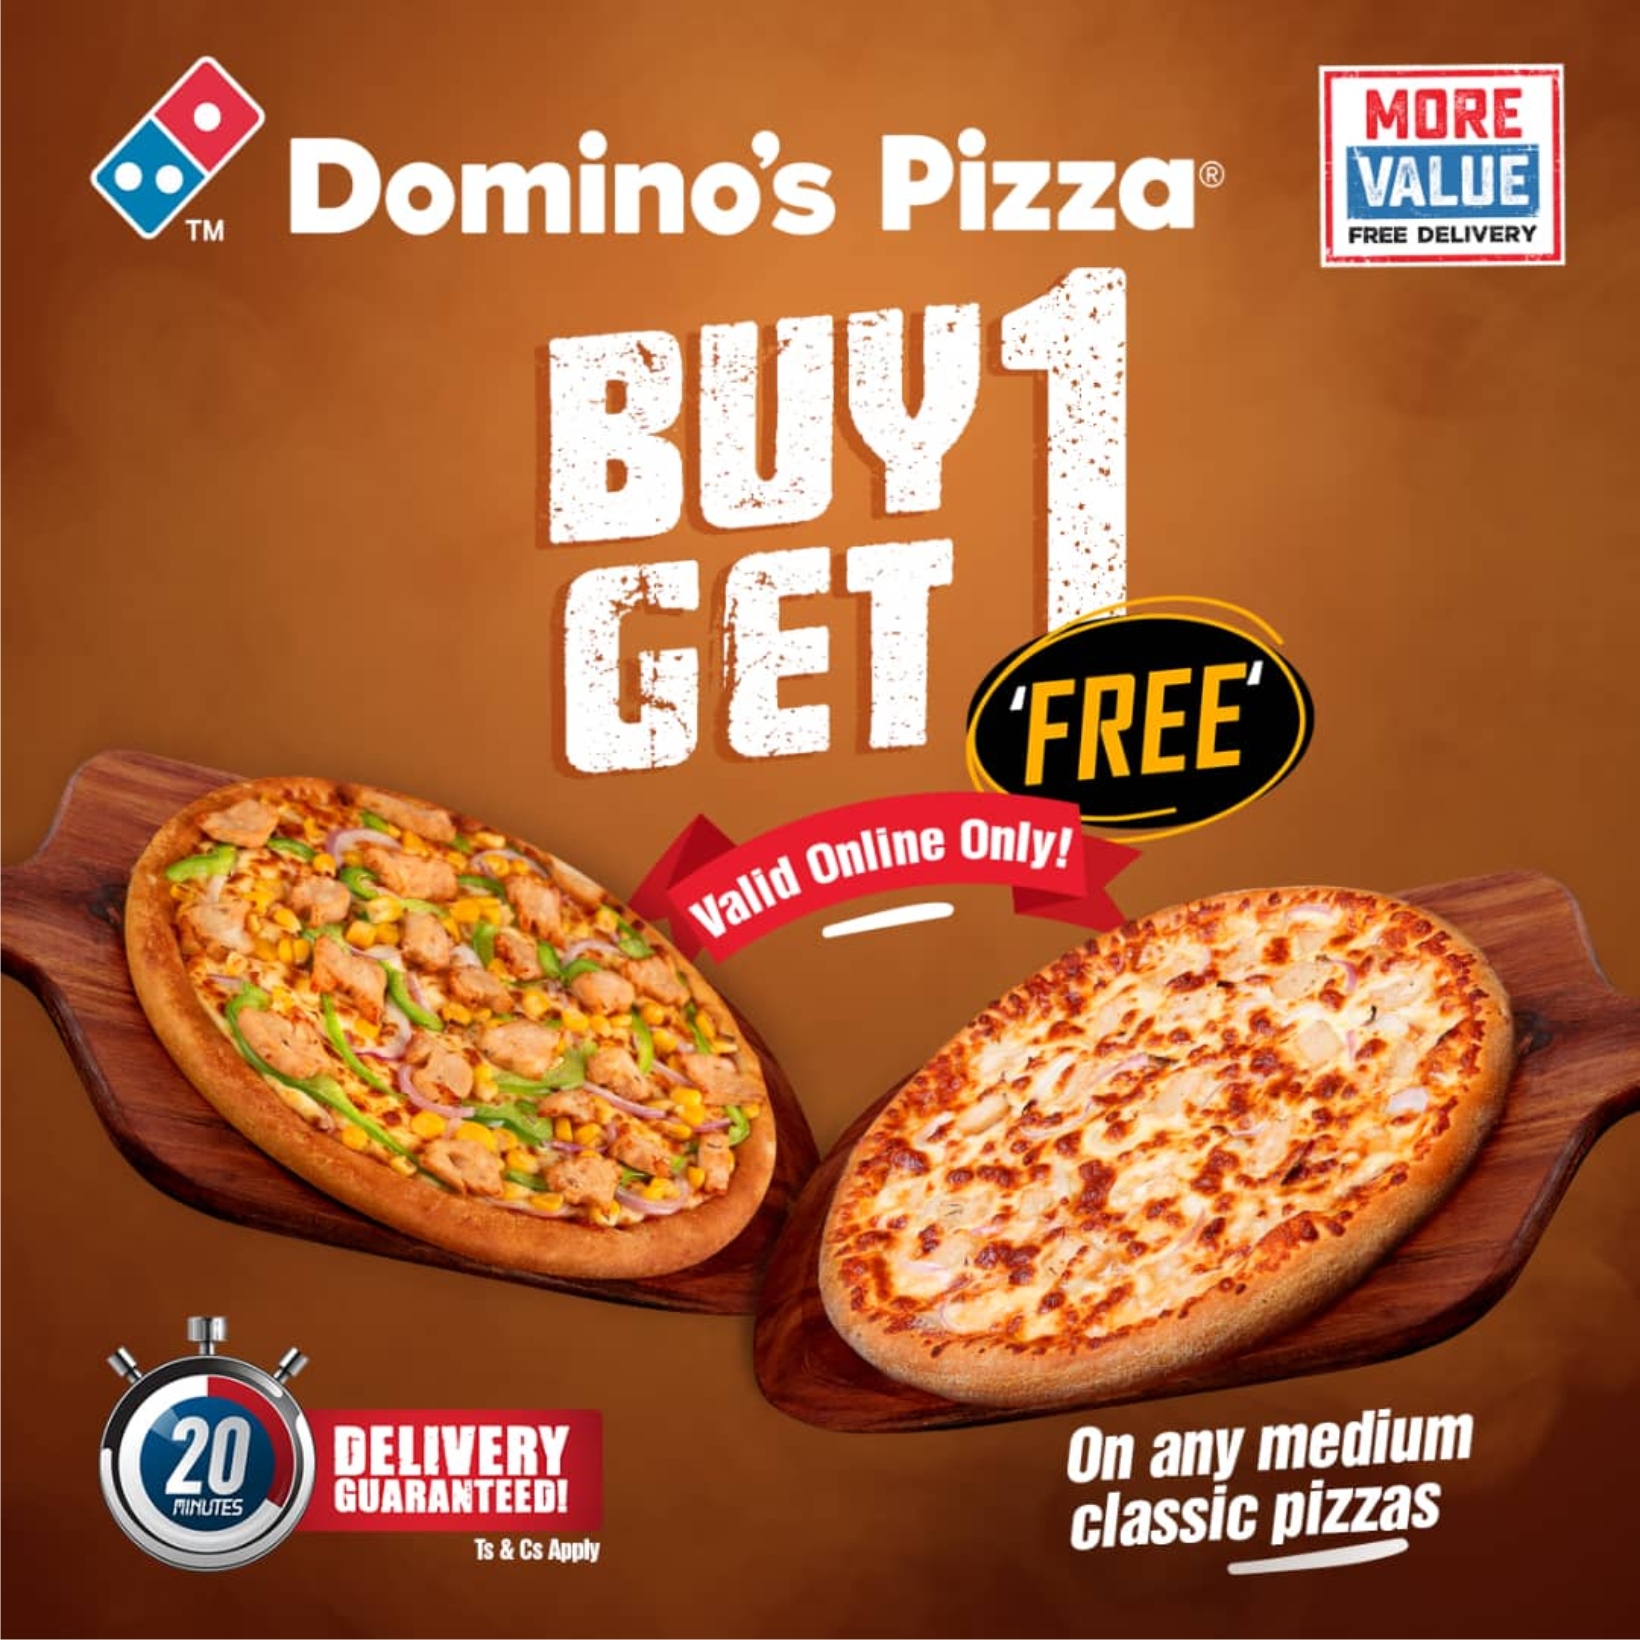 Enjoy Maximum Awoof Week With Domino’s Pizza Online Buy 1 Get 1 FREE Promo-marketingspace.com.ng